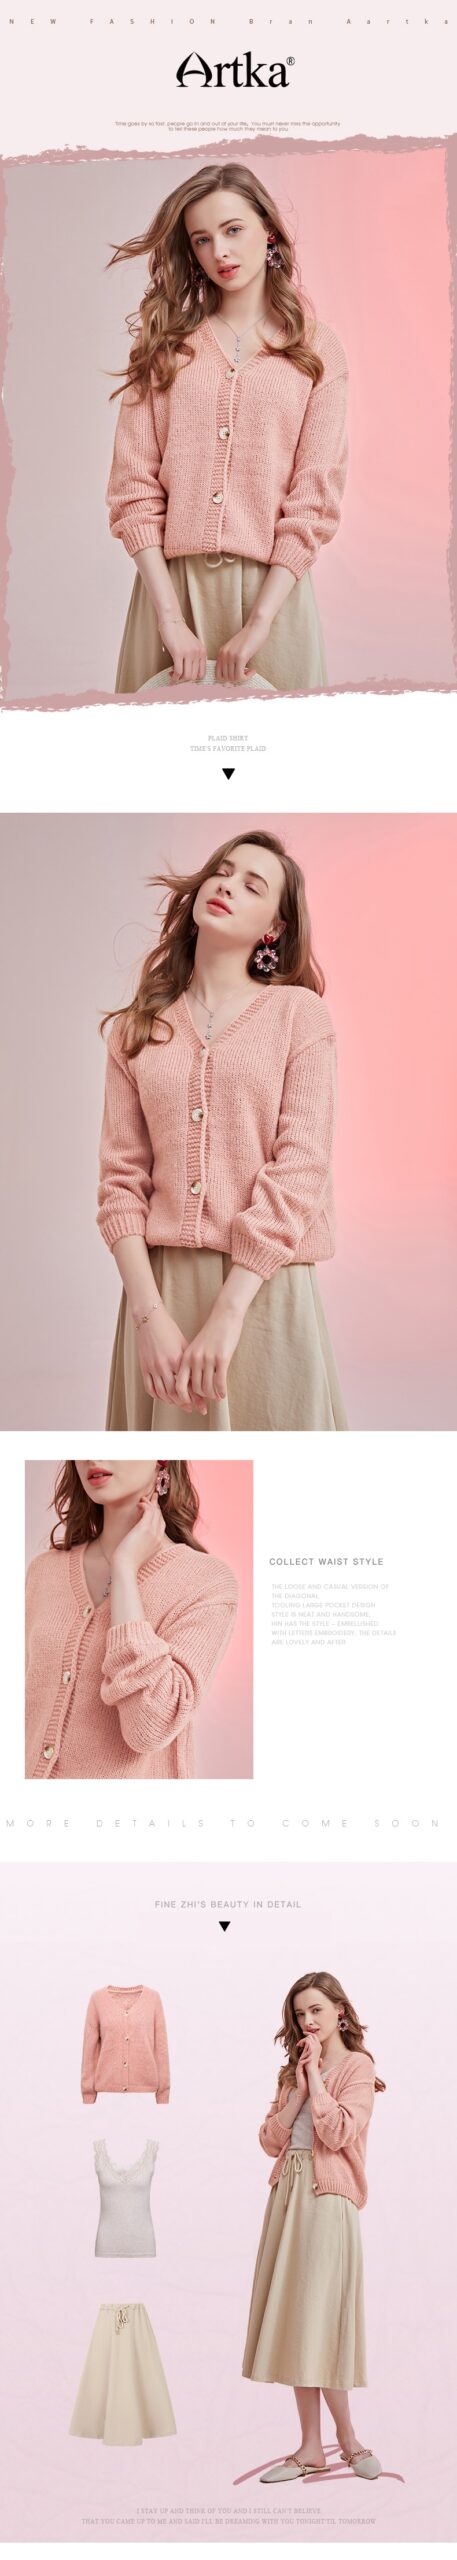 ARTKA 2021 Spring New Women Cardigan Elegant V-Neck Knitted Cardigan Sweaters Soft Loose Knitted Sweater Outerwear WB25110C